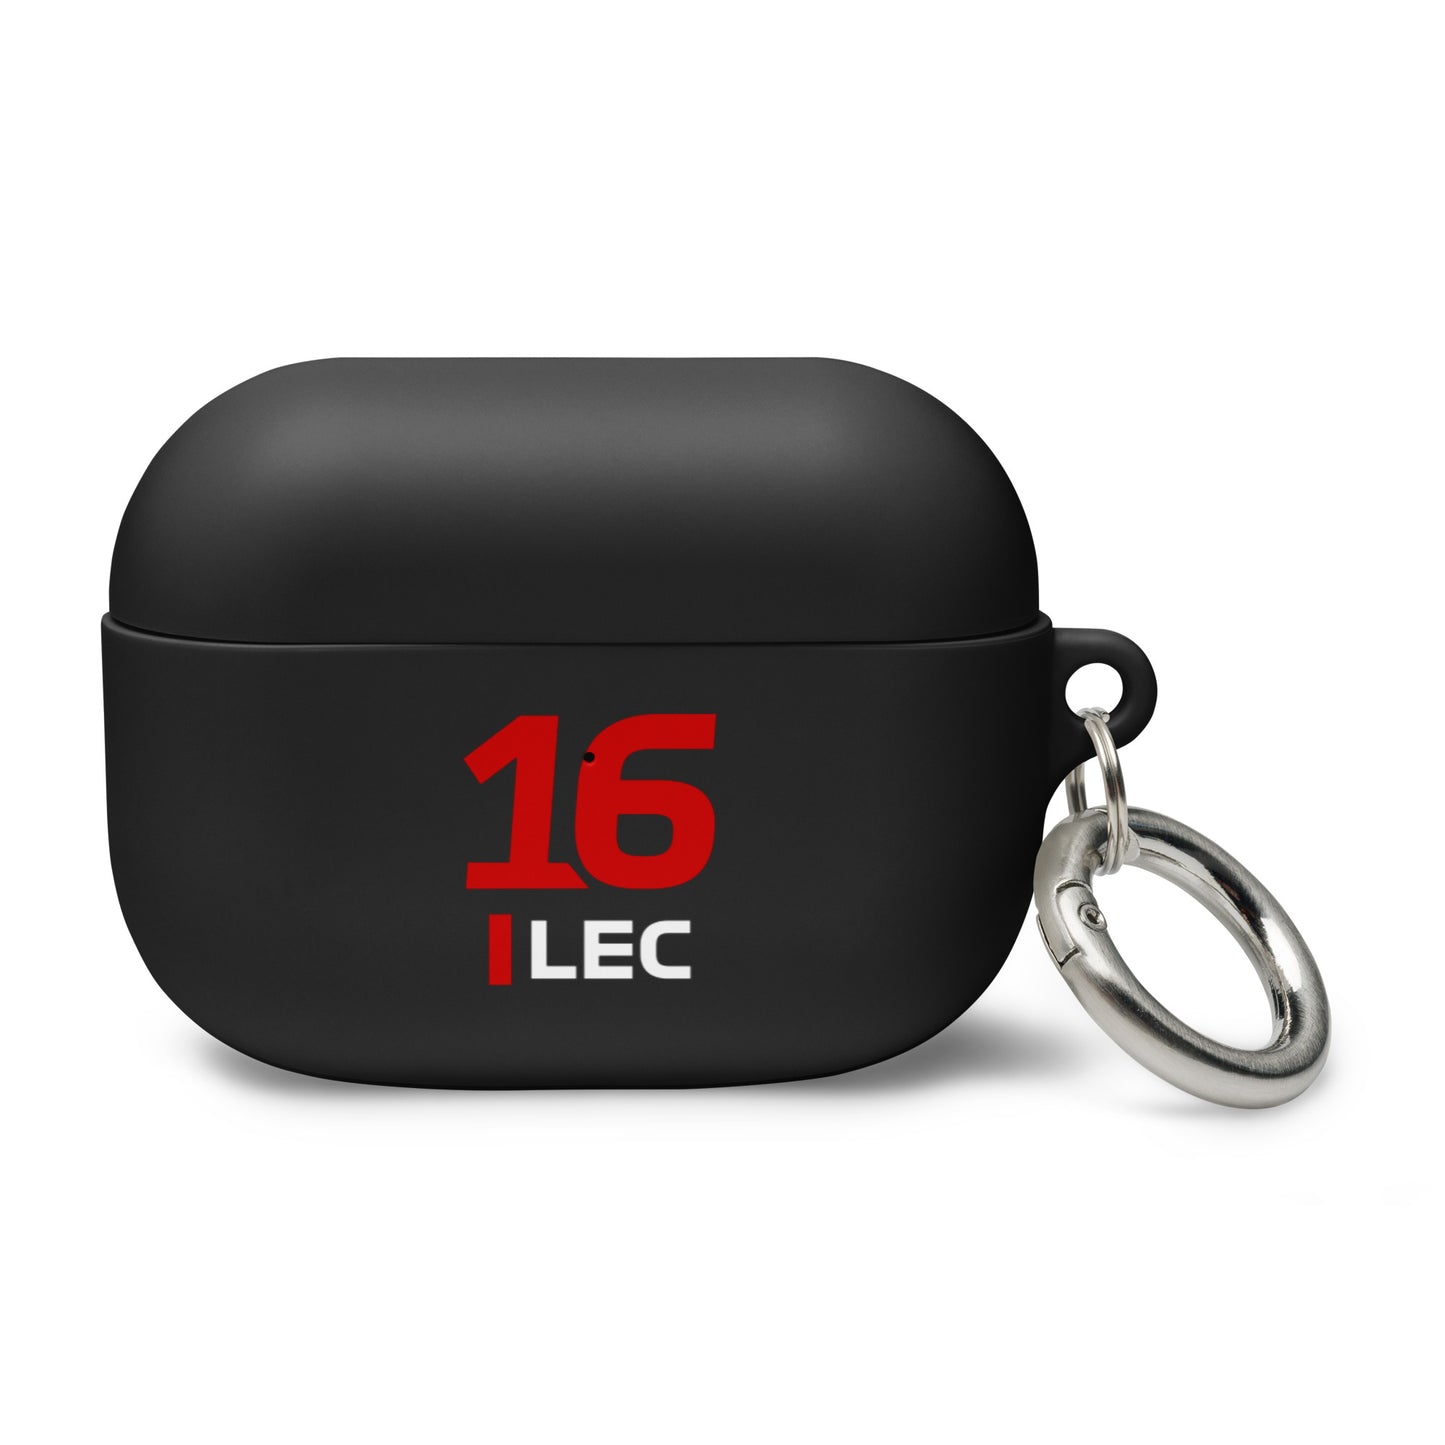 Charles Leclerc AirPods Case pro black